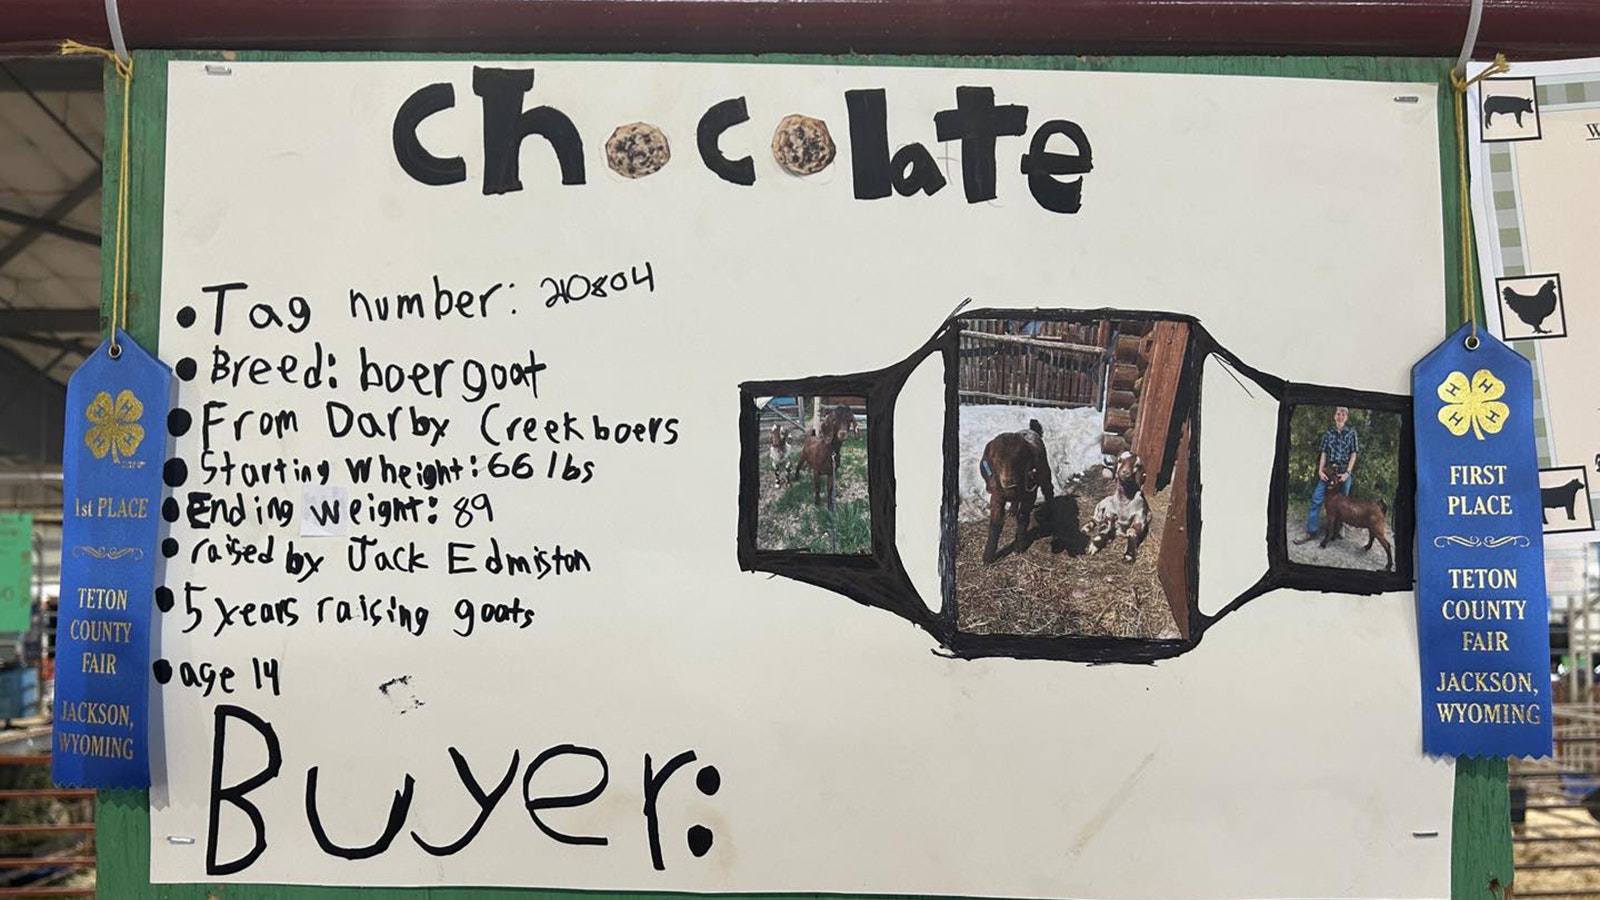 Jack Edmonton made this poster for his goat, Chocolate.